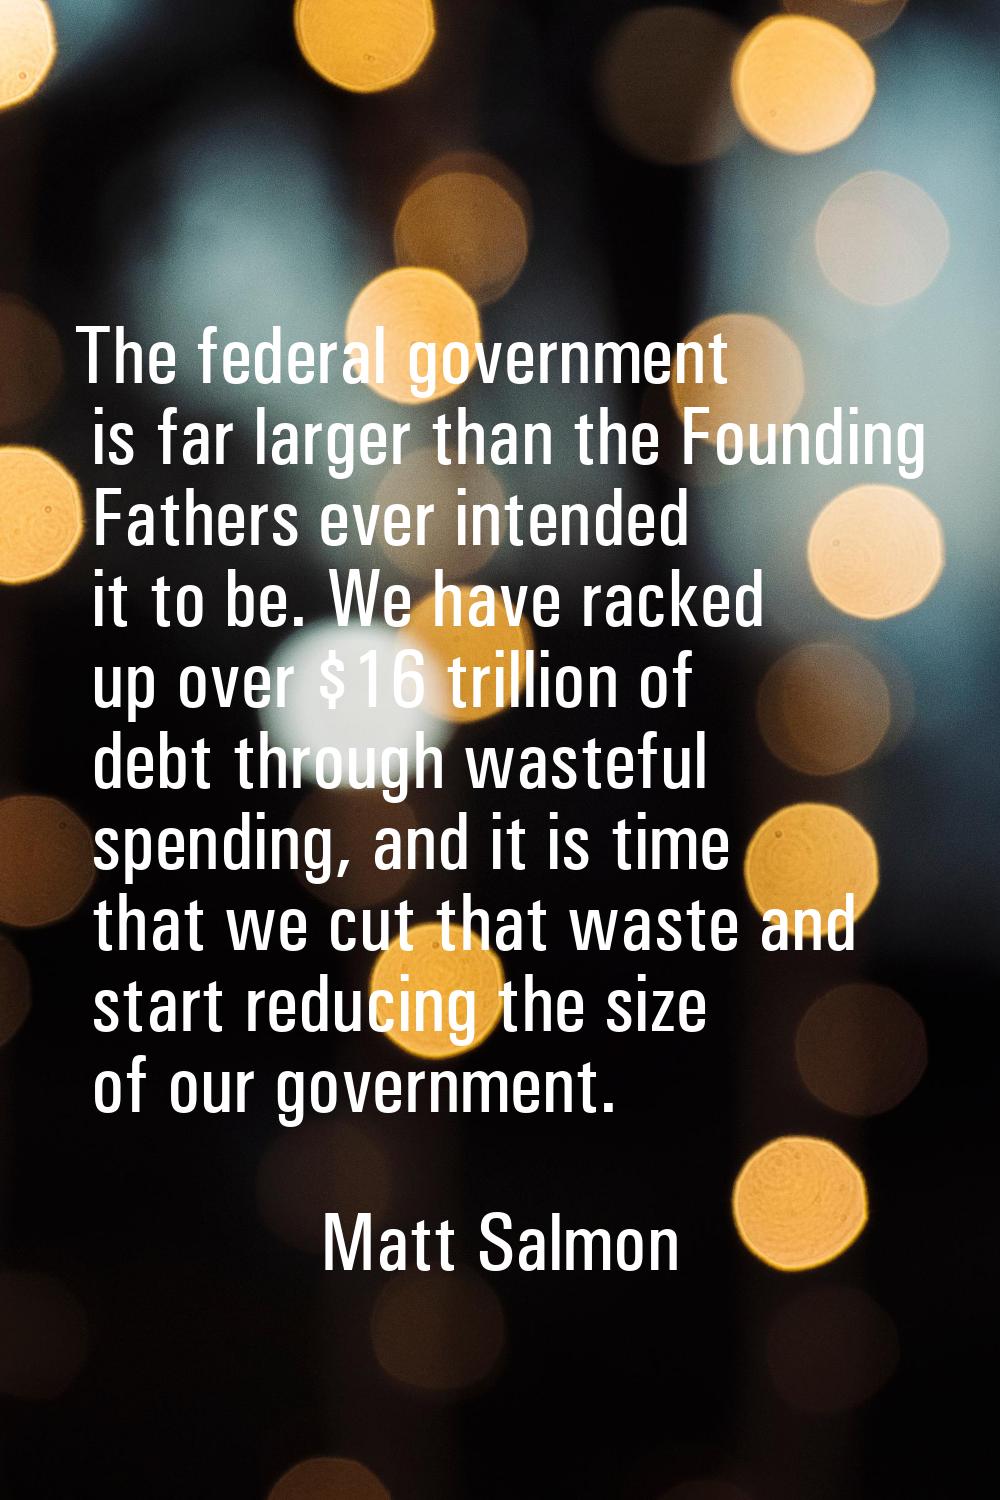 The federal government is far larger than the Founding Fathers ever intended it to be. We have rack